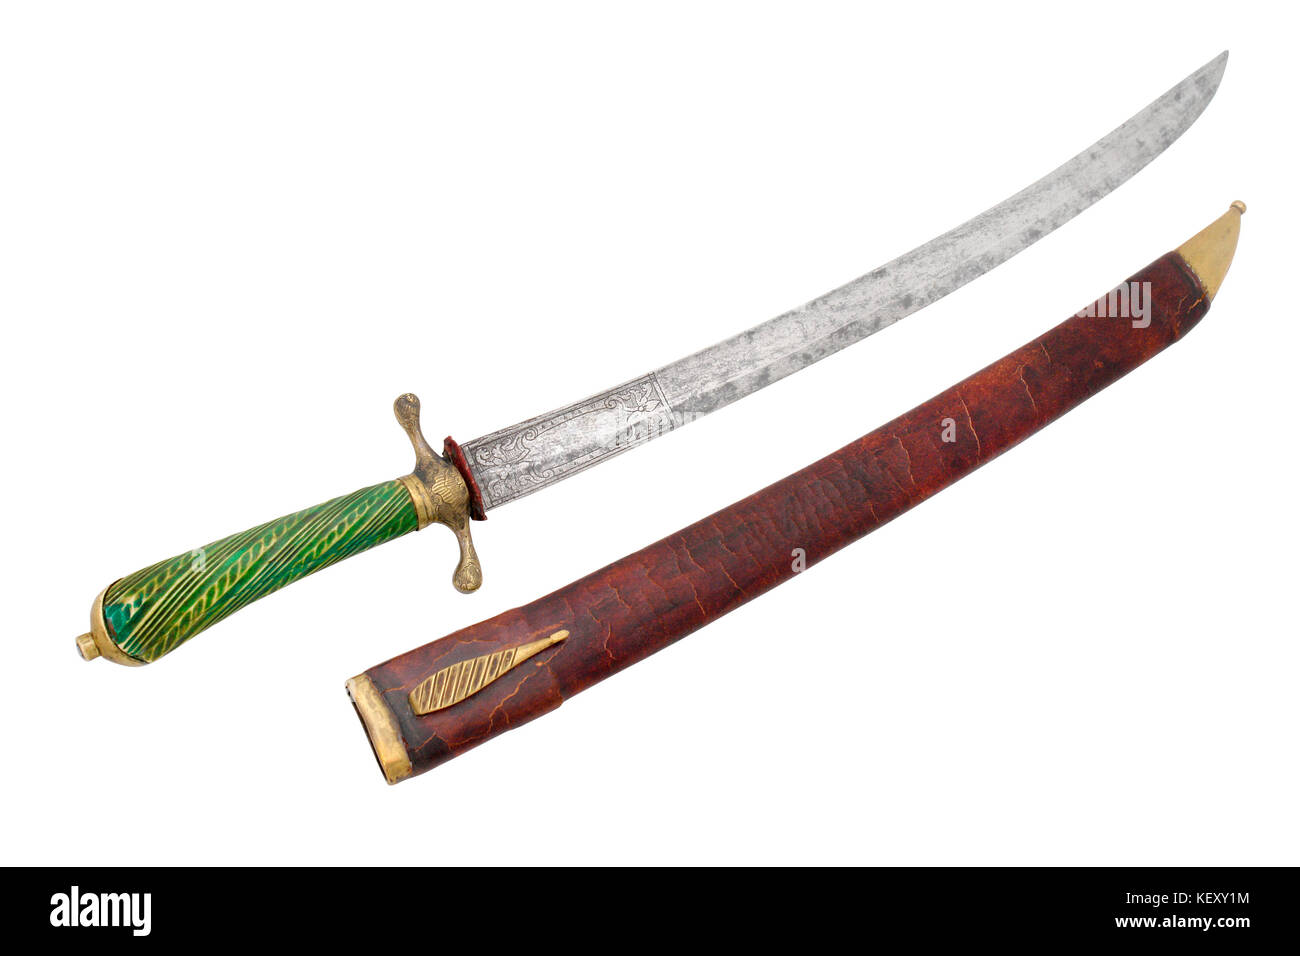 French huntsman broadsword. France, end of 18th century. Path on white background Stock Photo